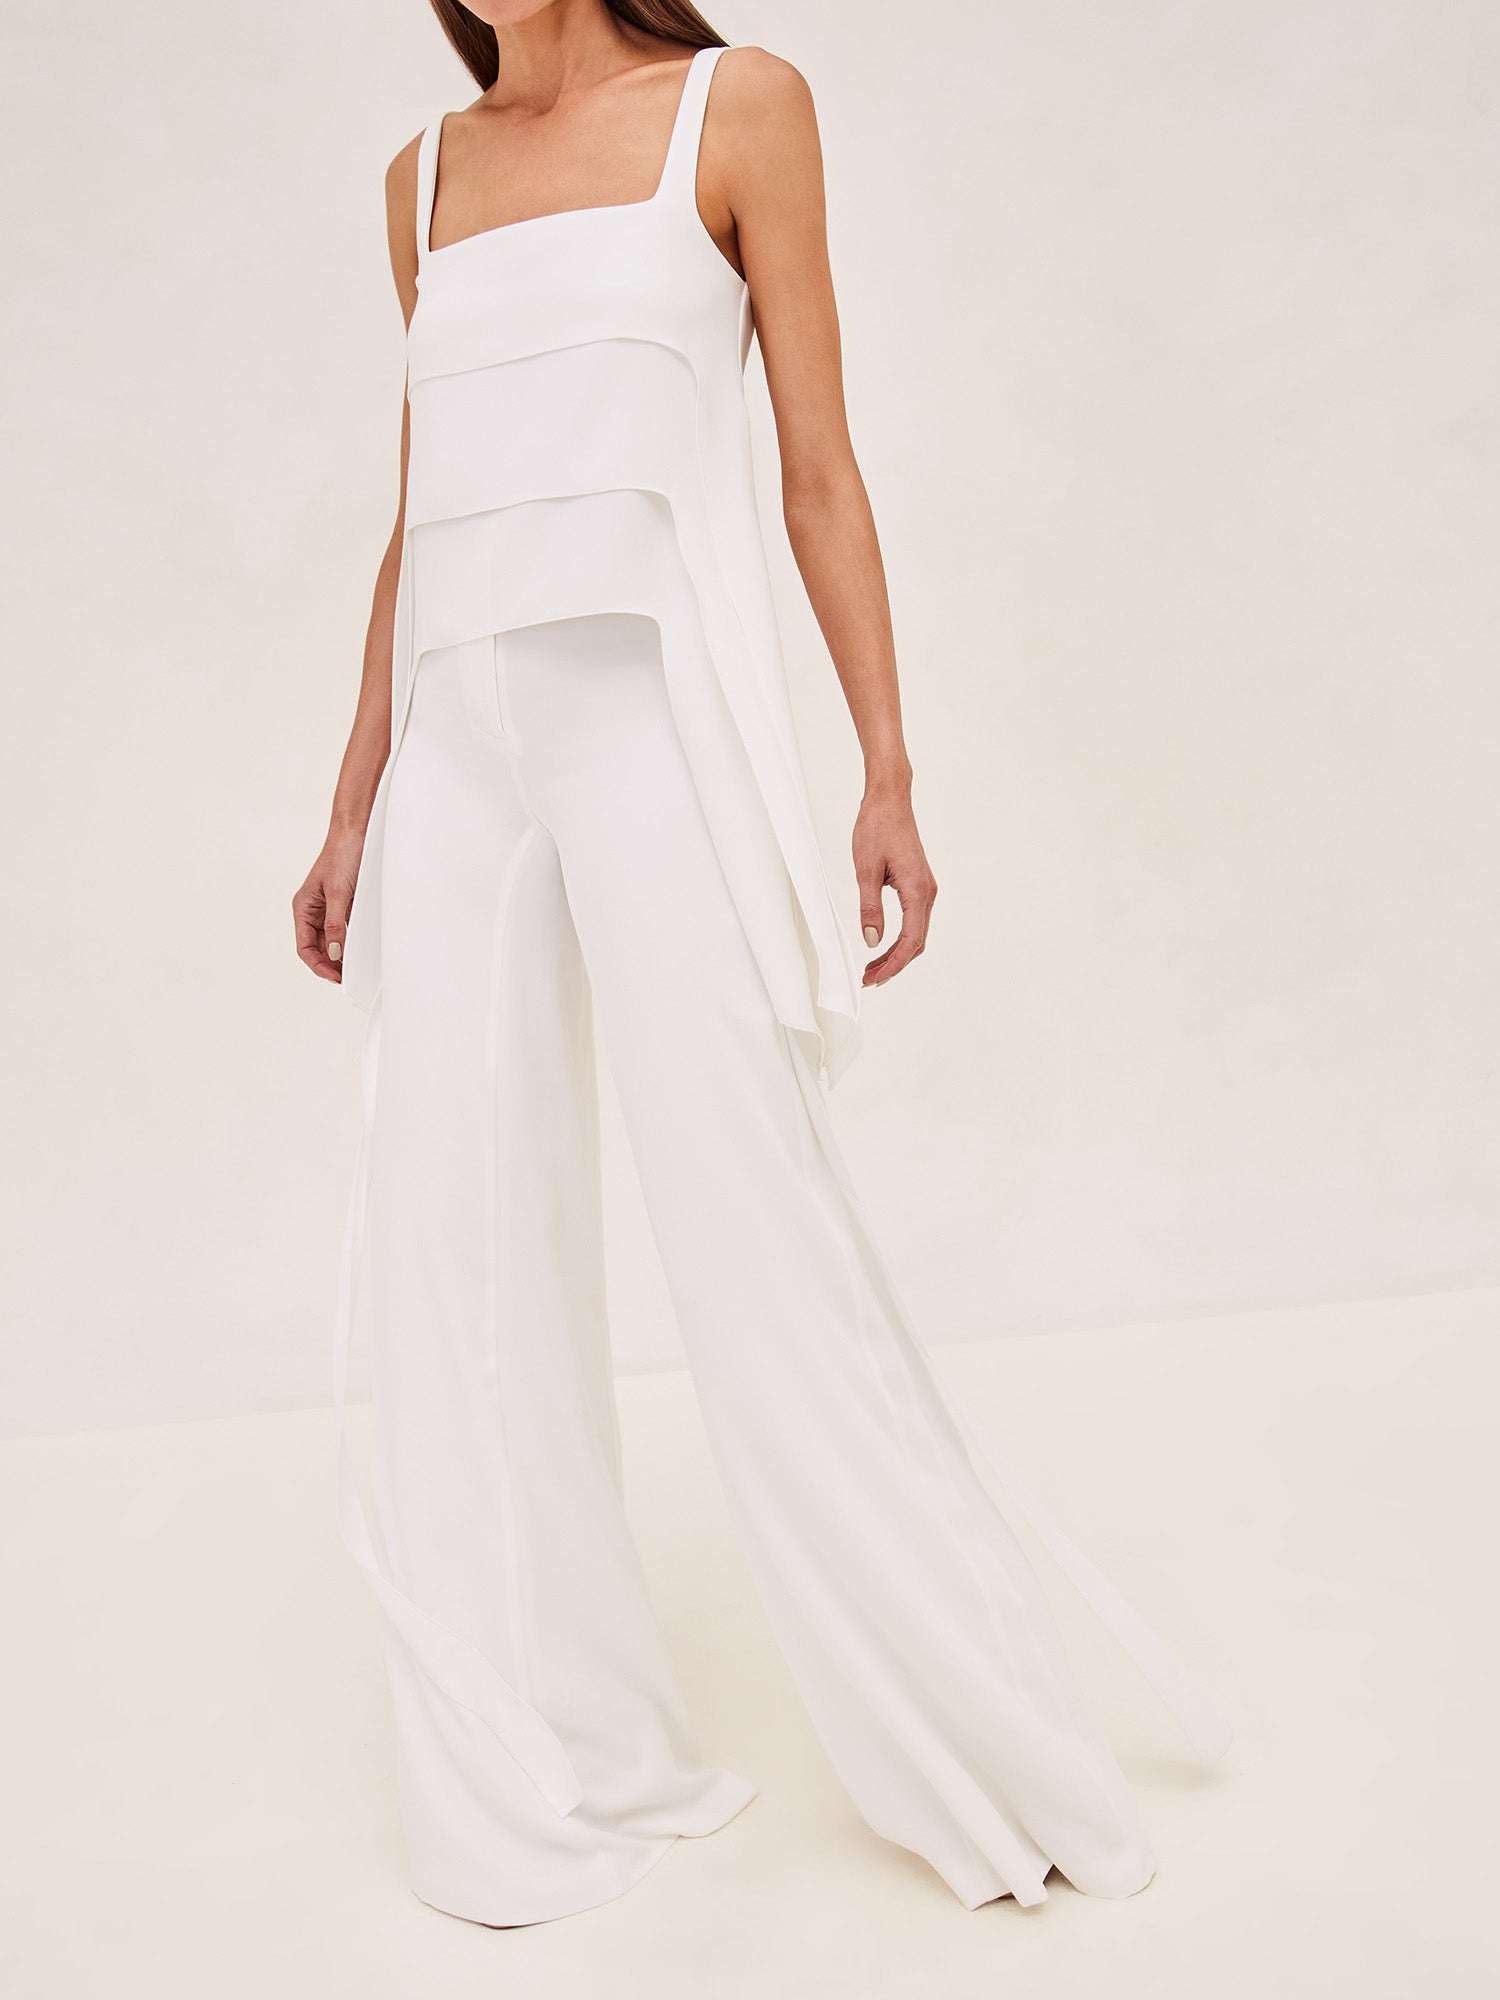 ALEXIS Dinah wide leg pant in white hover image